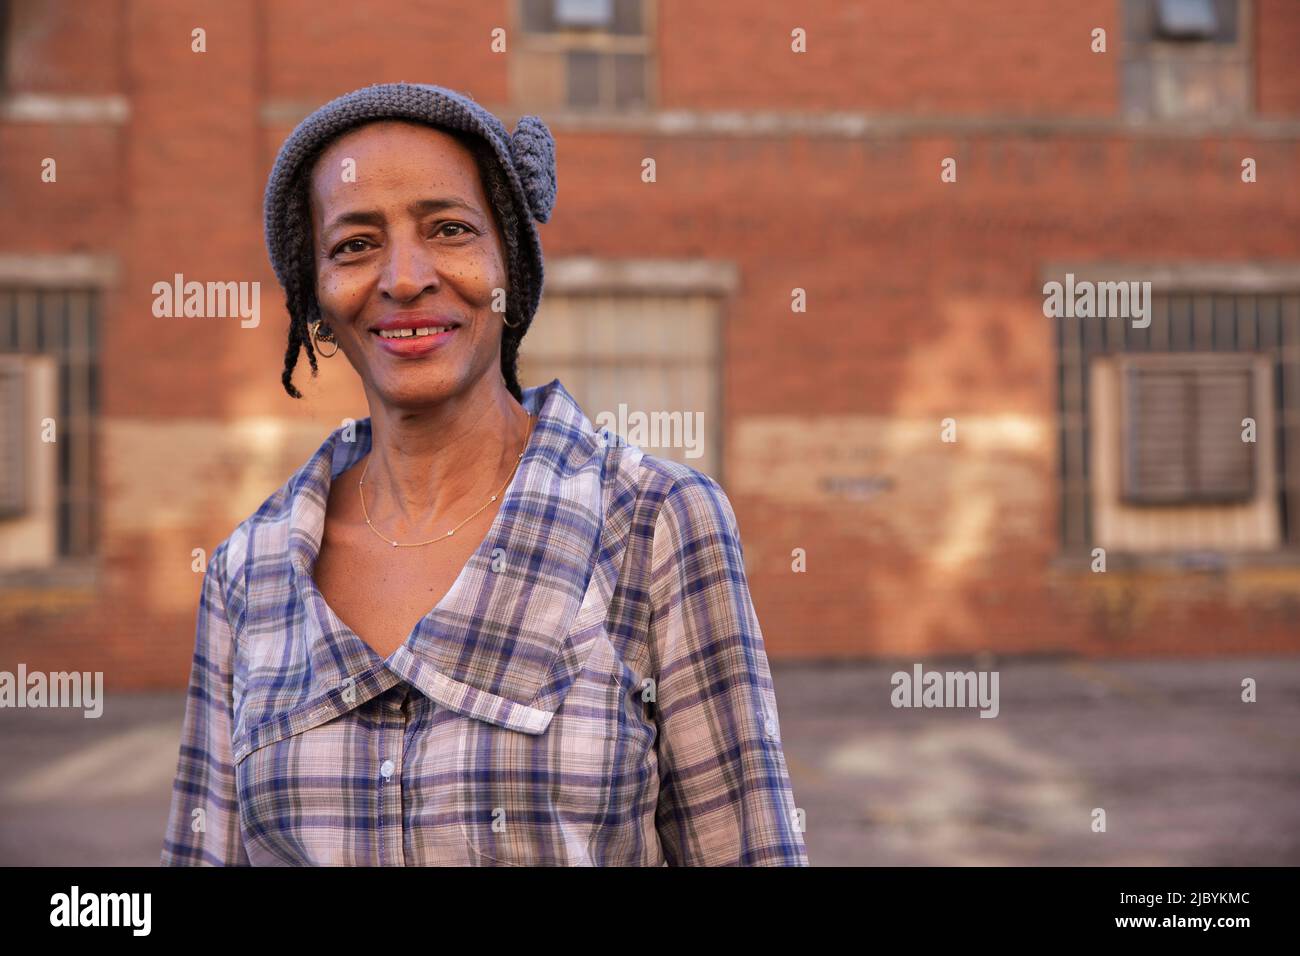 Portrait of older woman wearing knit hat standing in alley smiling looking at camera, brick wall in background Stock Photo